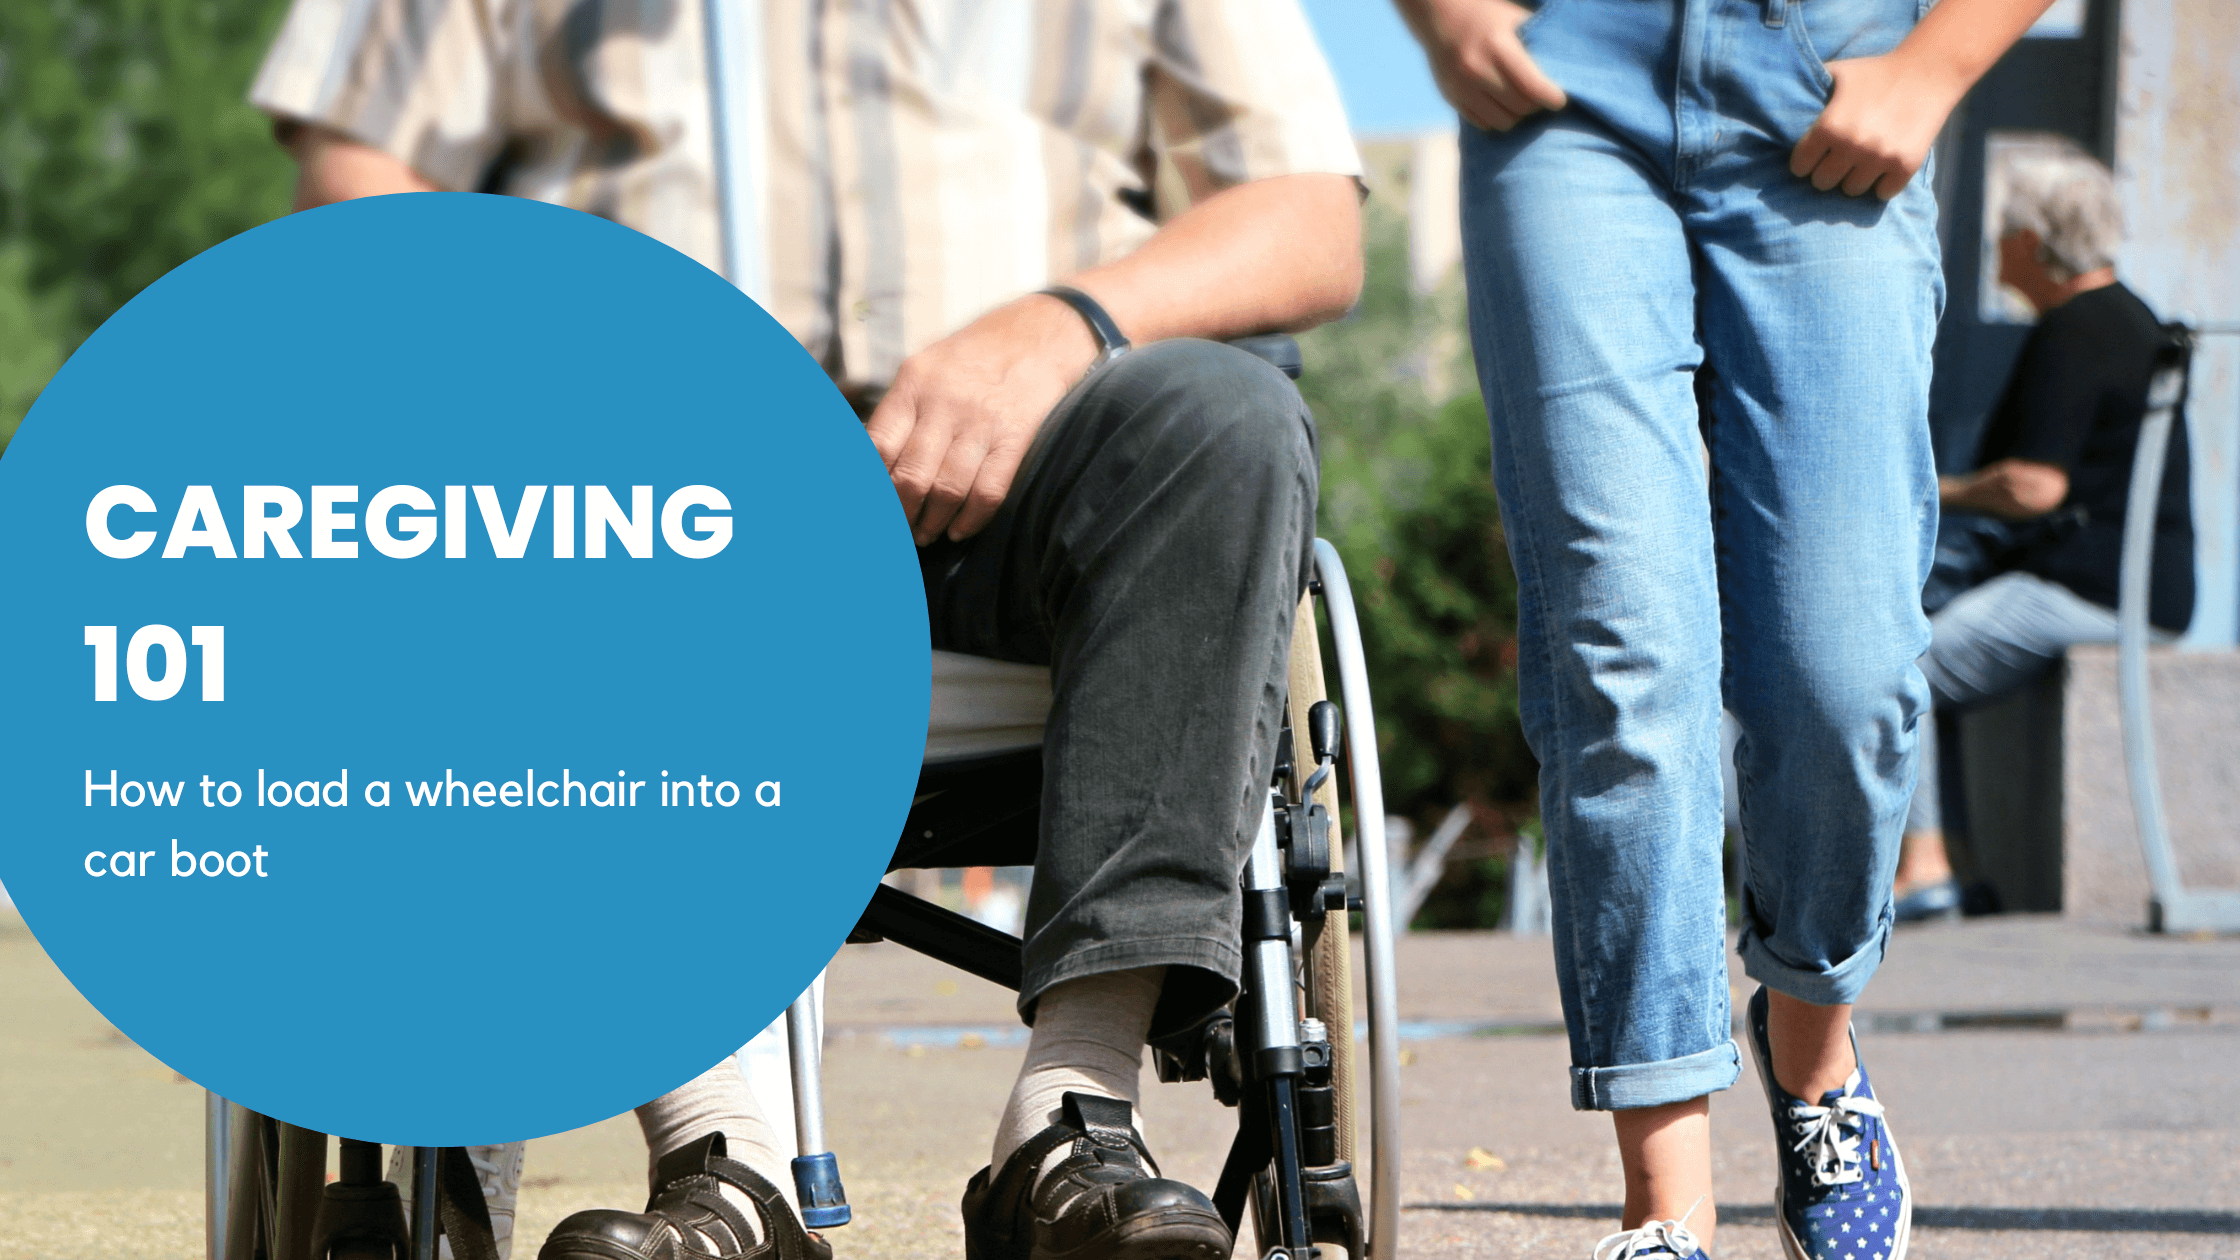 Caregiving 101: How to load a wheelchair into a car boot